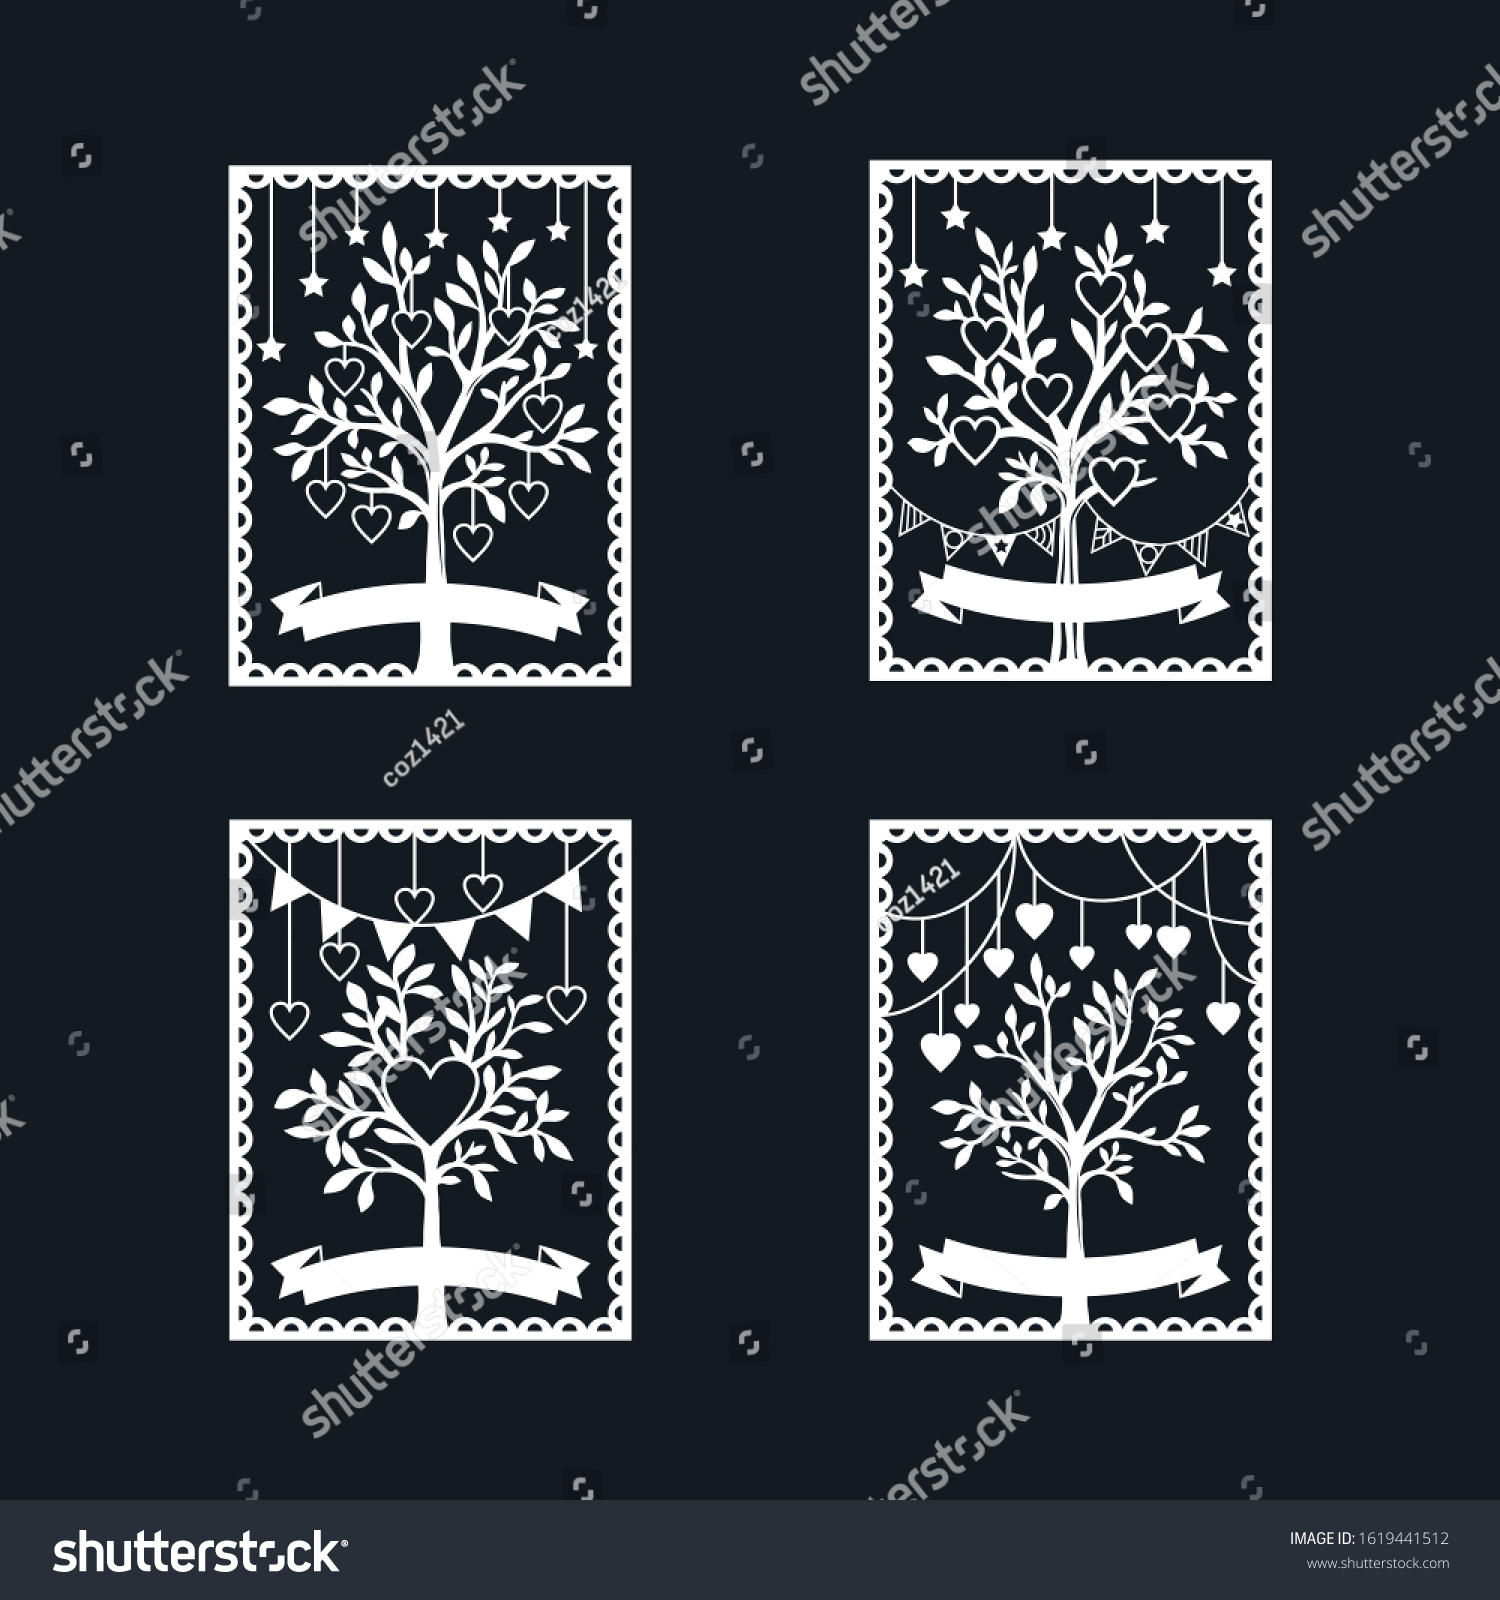 SVG of Beautiful Floral Cut File Elements svg